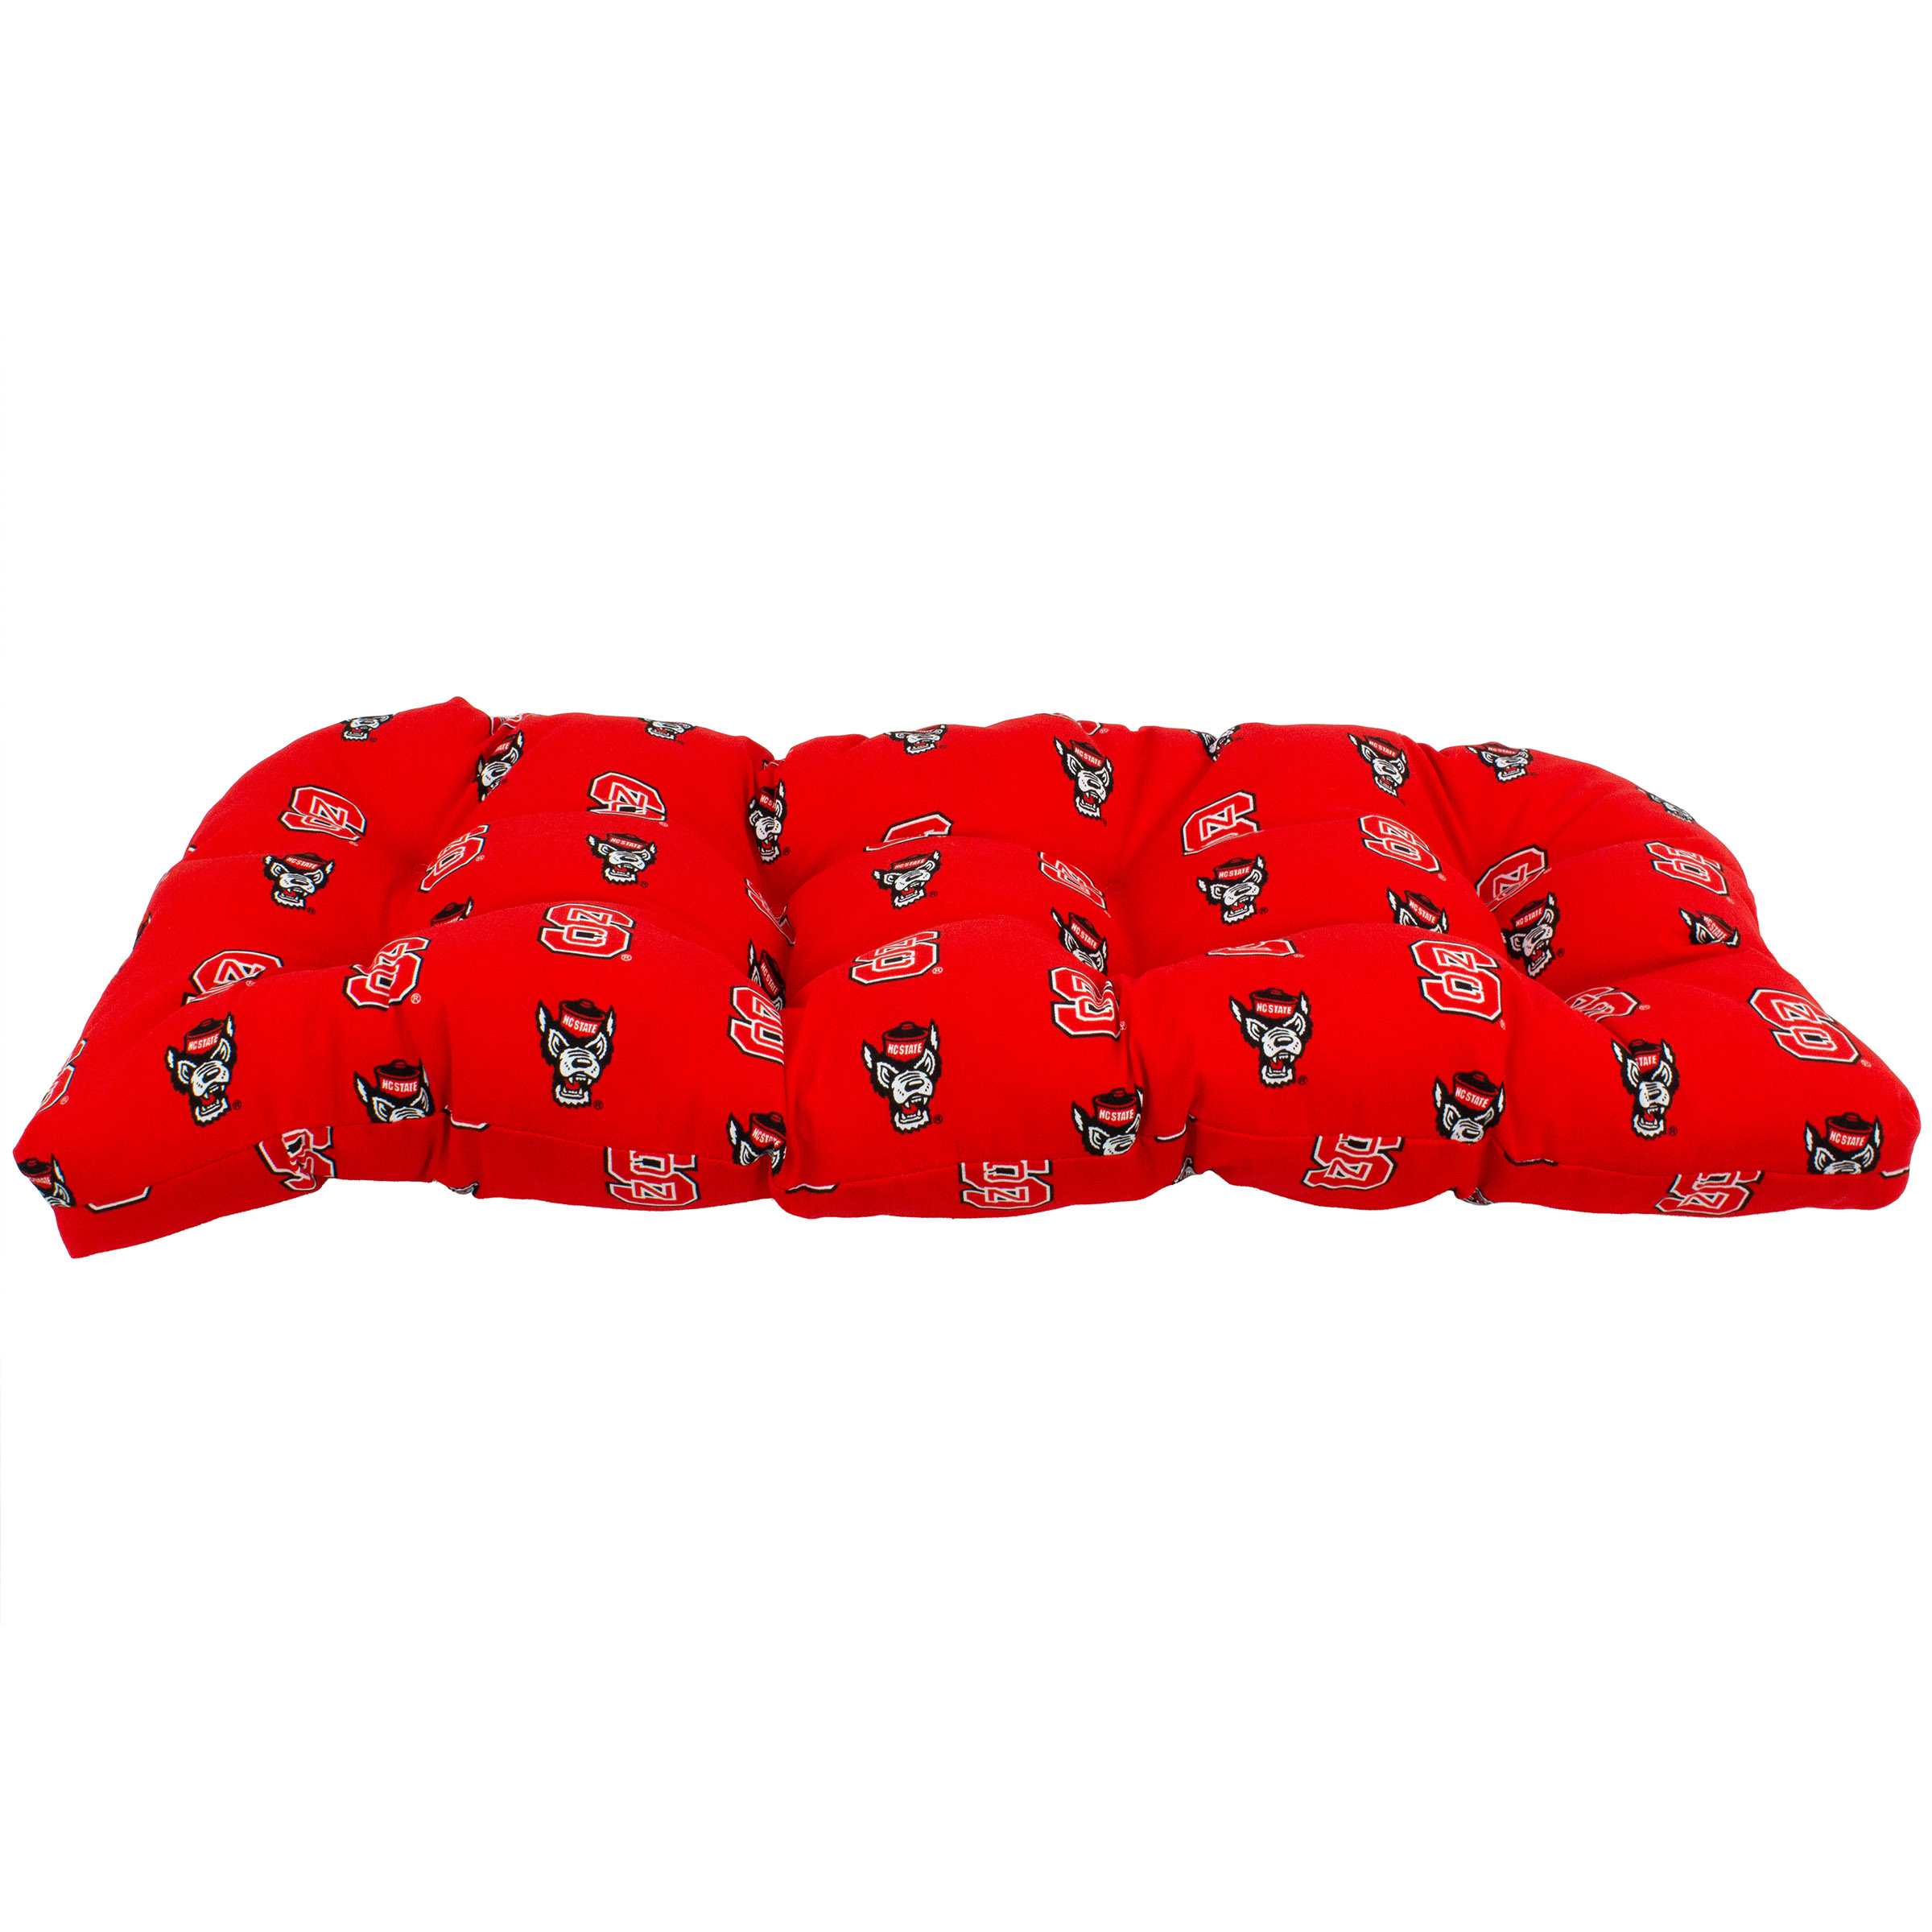 College Covers North Carolina State Wolf pack Settee Cushion, 20 x 46 - image 3 of 7